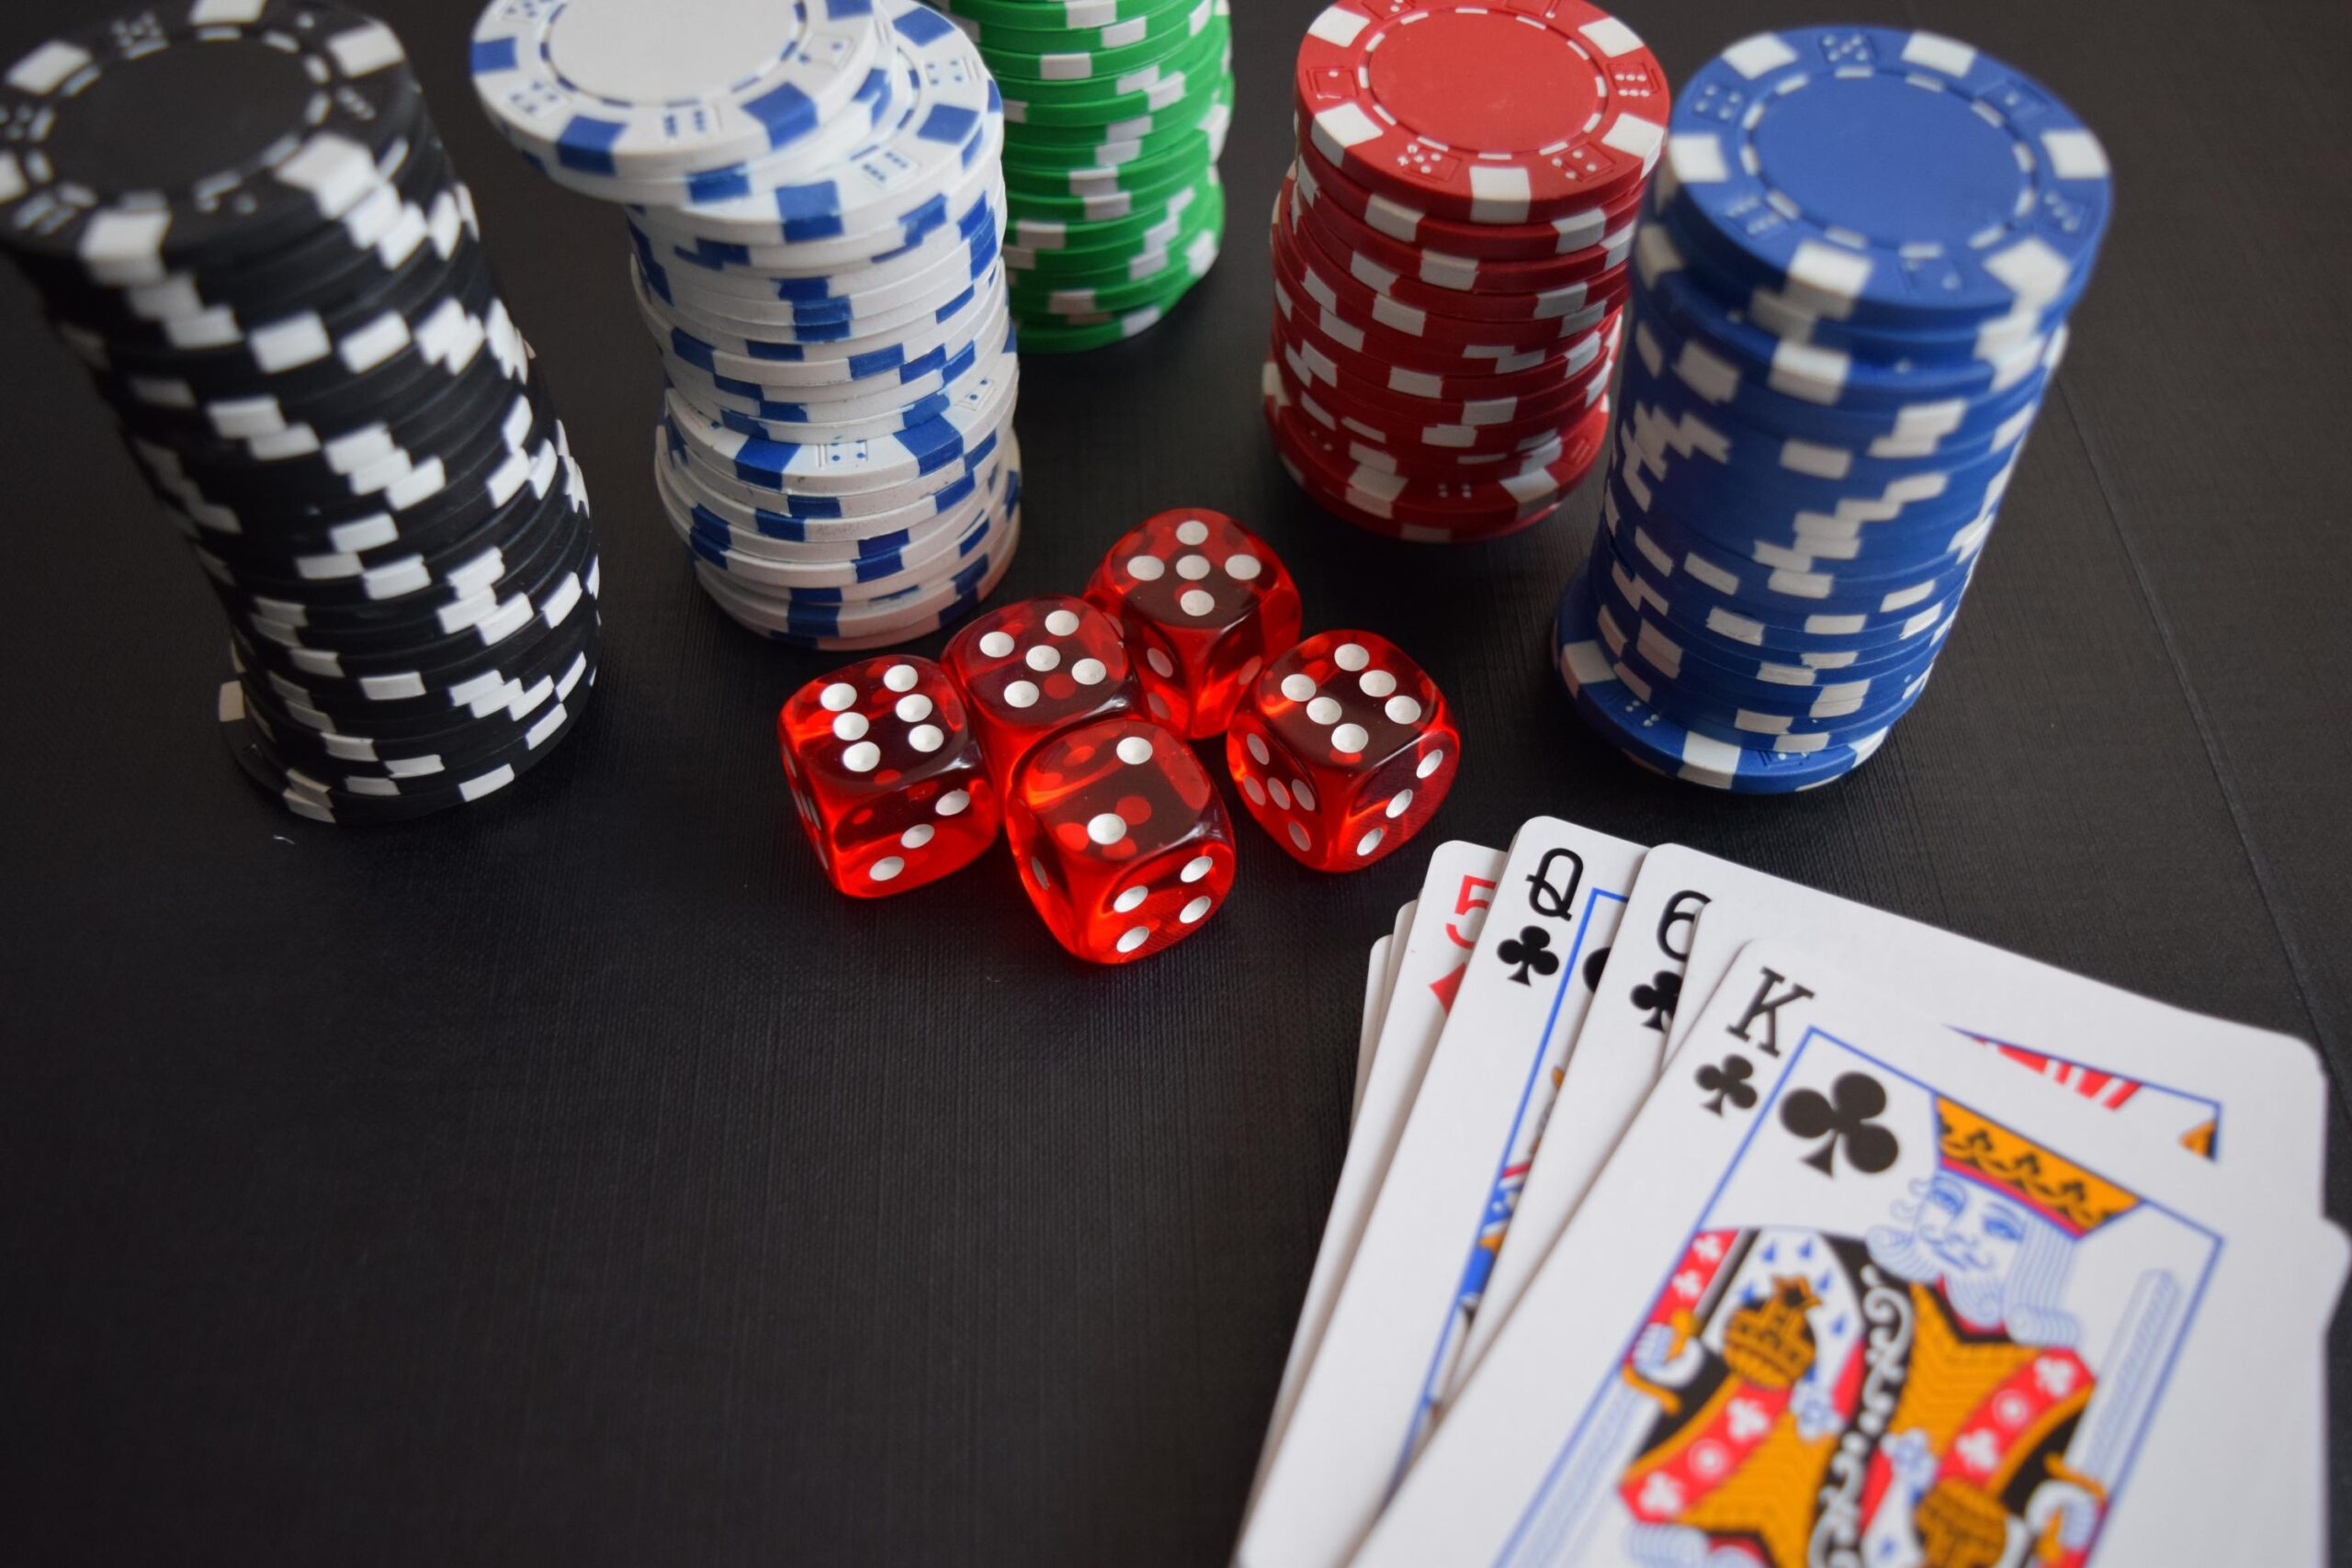 What are the top 10 most influential books about gambling published this year?